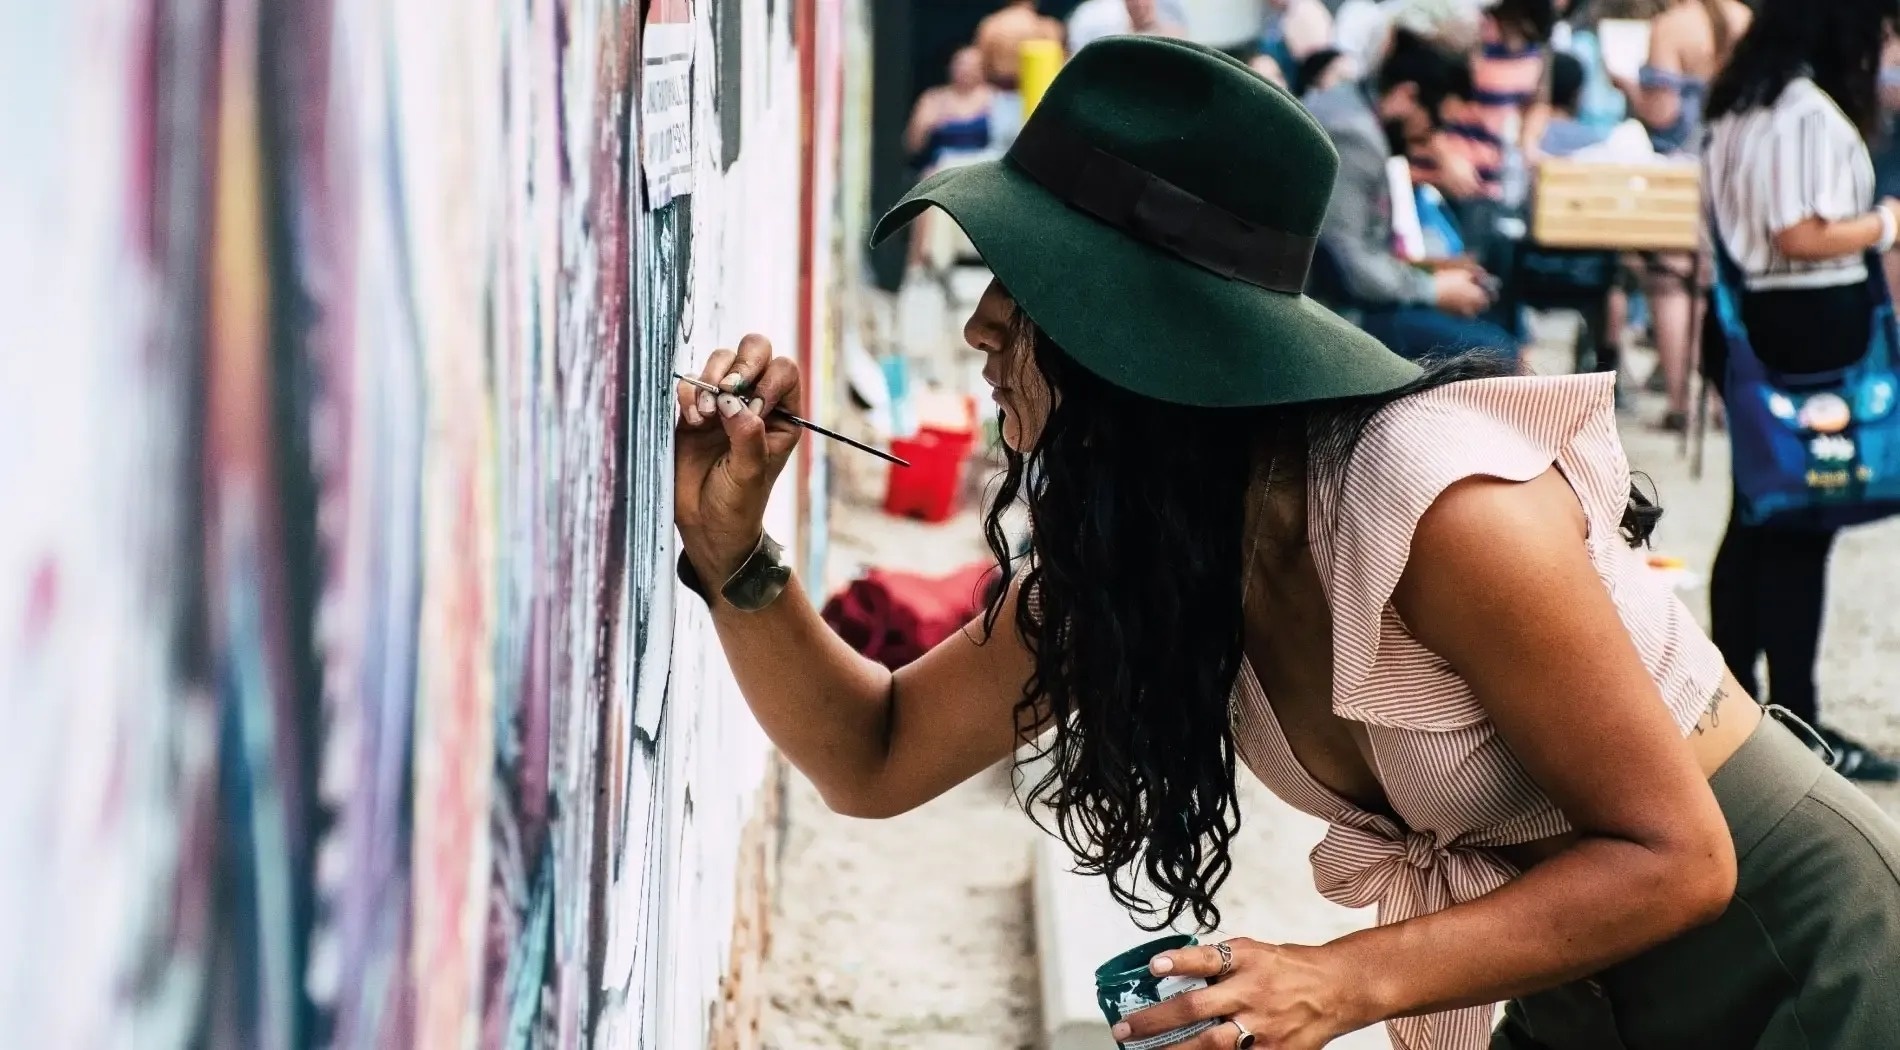 a woman wearing a green hat is painting on a wall